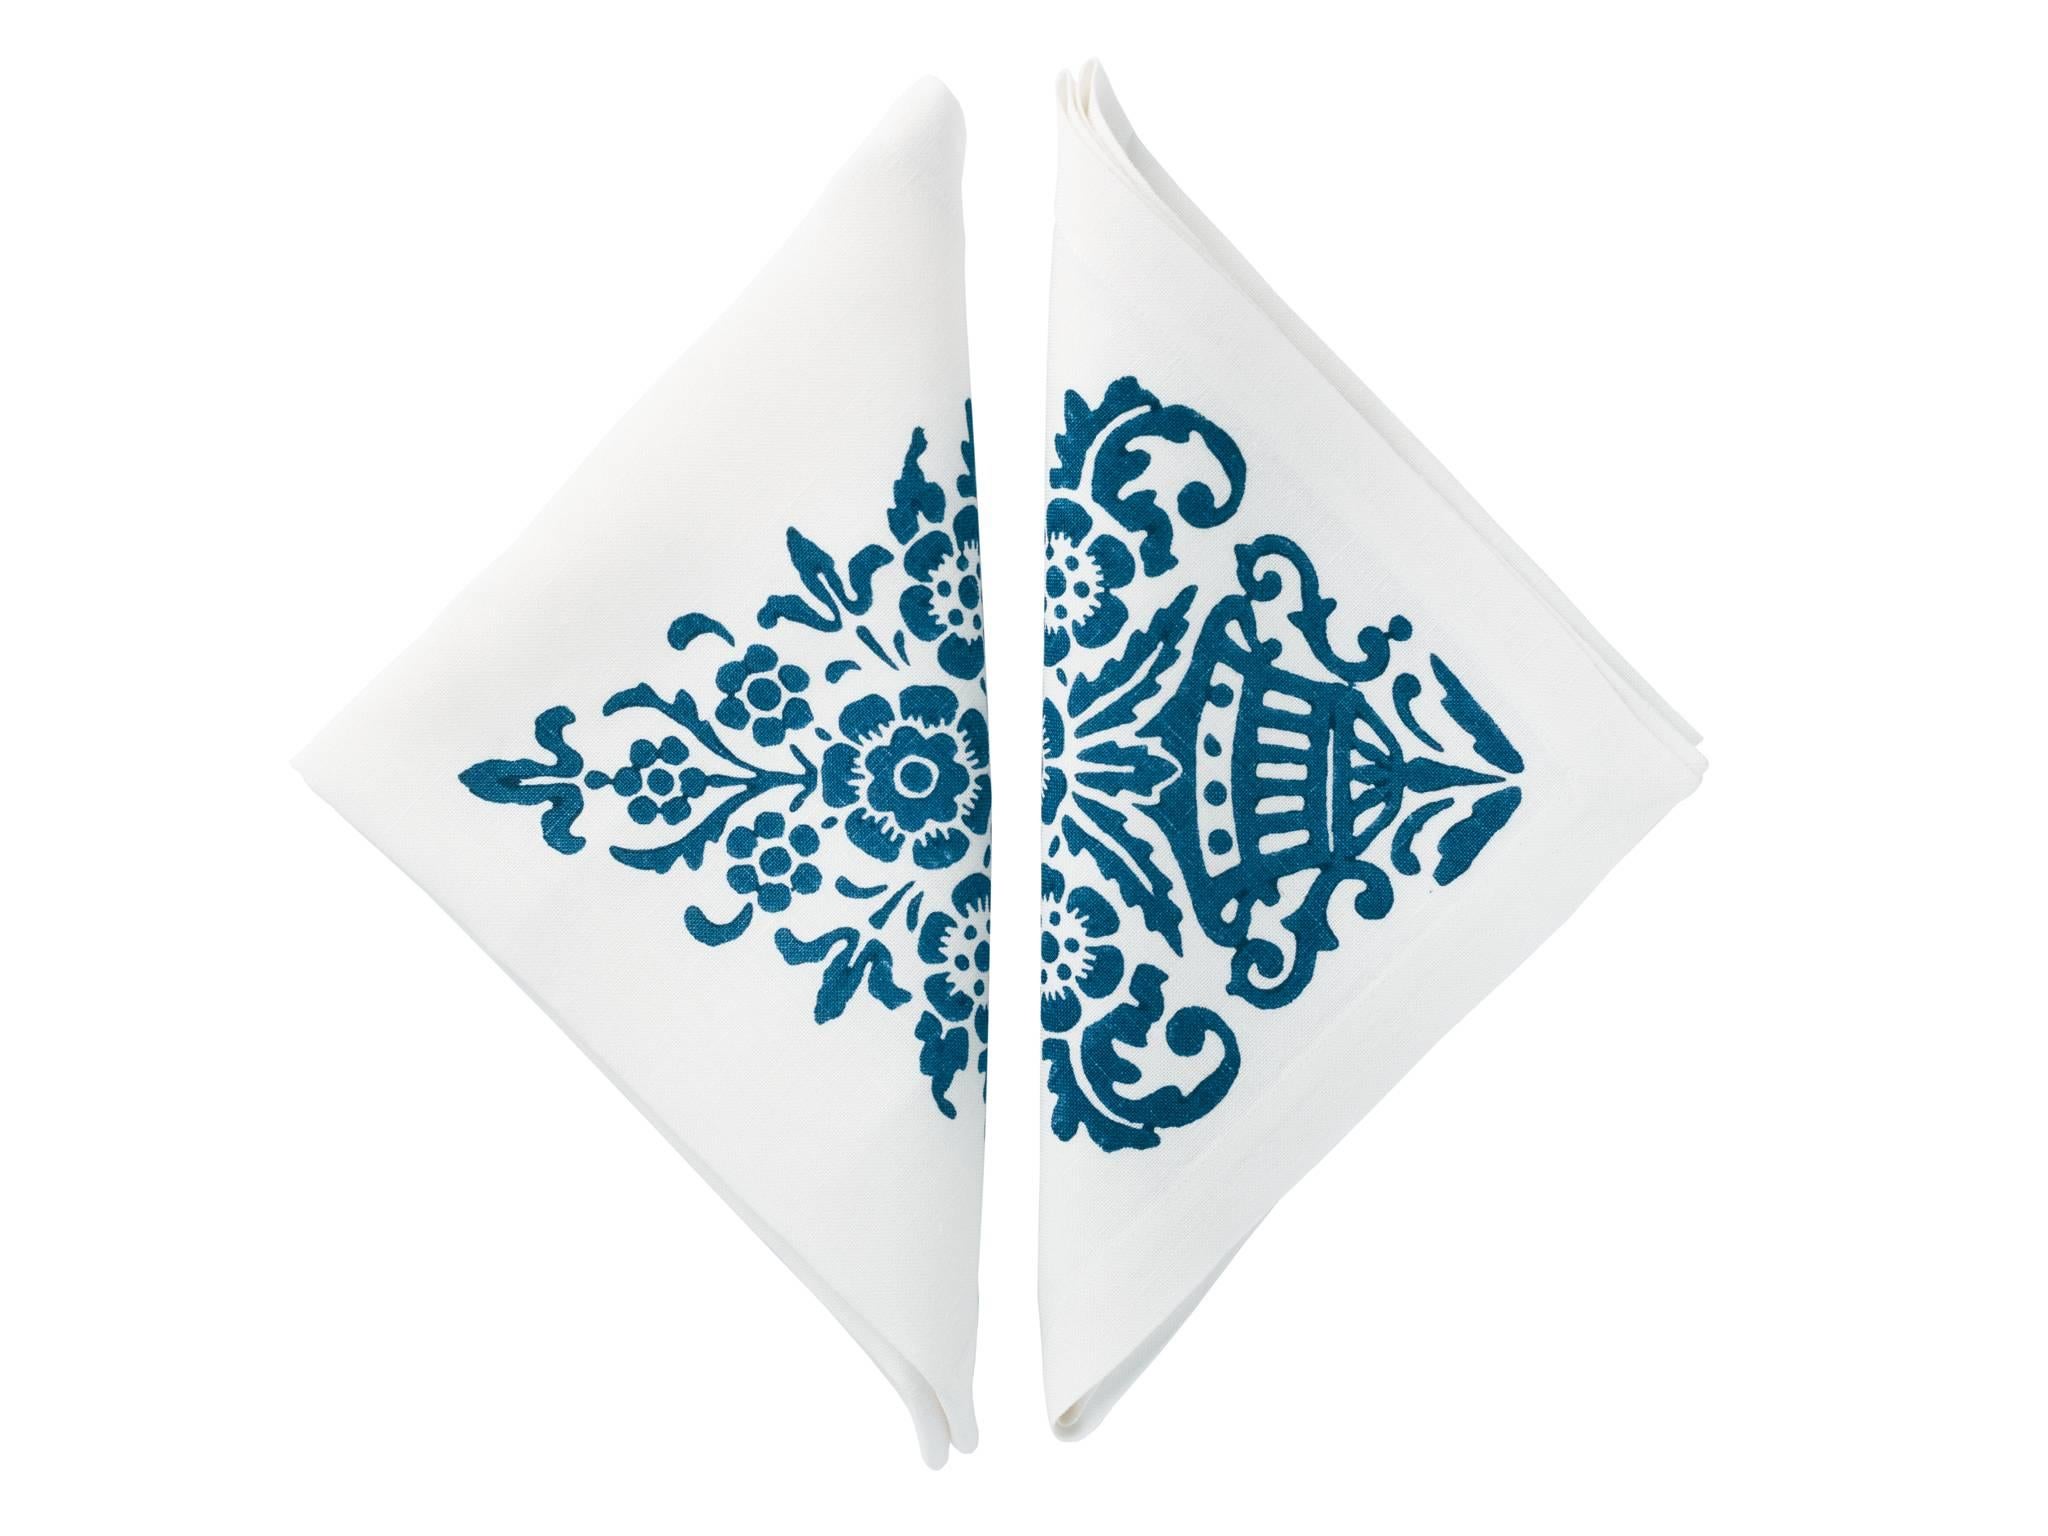 Blue hand printed linen napkins. 

These hand printed Italian linen napkins have been created using the very finest pure white linen exclusively for Cabana. The master artisan print house in Emilia-Romagna, Italy, has used traditional printing